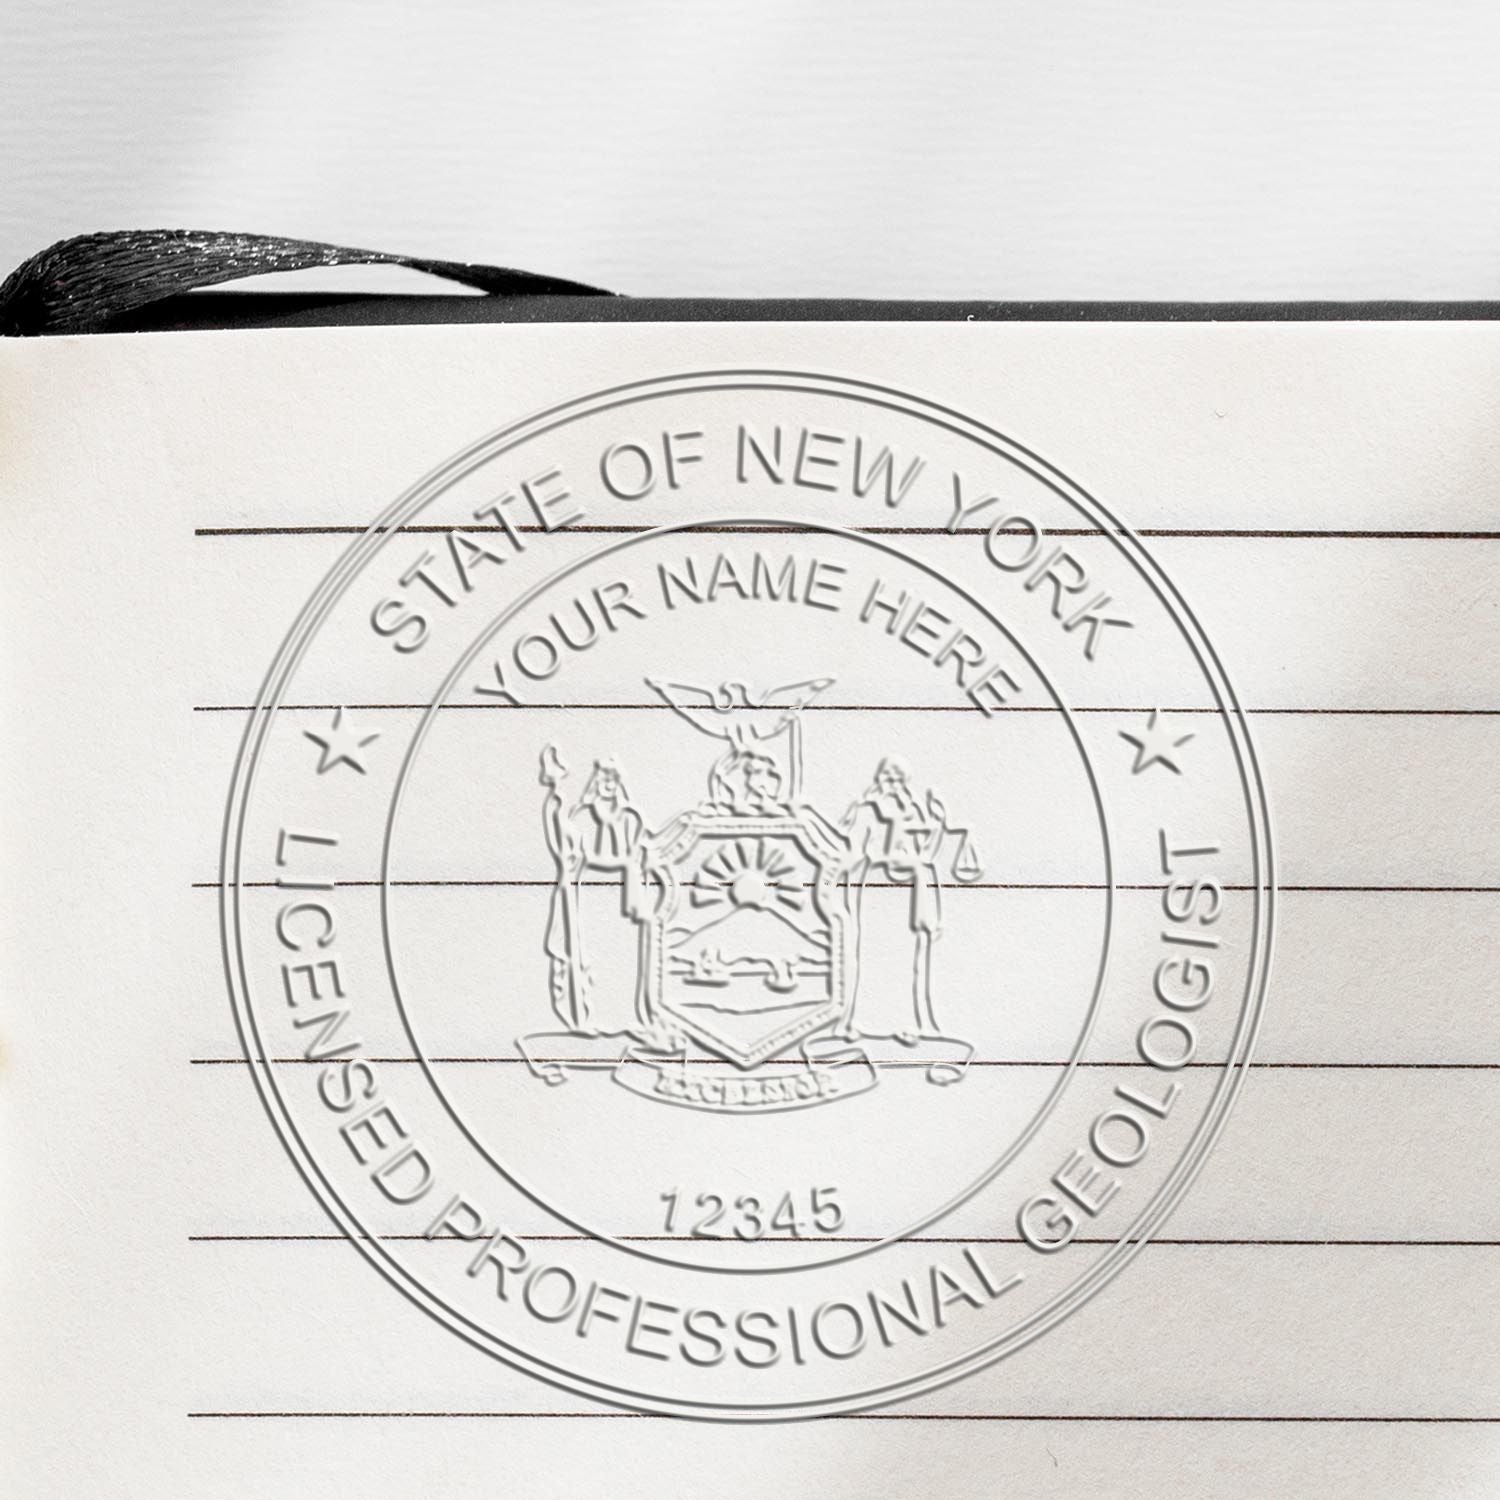 The main image for the State of New York Extended Long Reach Geologist Seal depicting a sample of the imprint and imprint sample